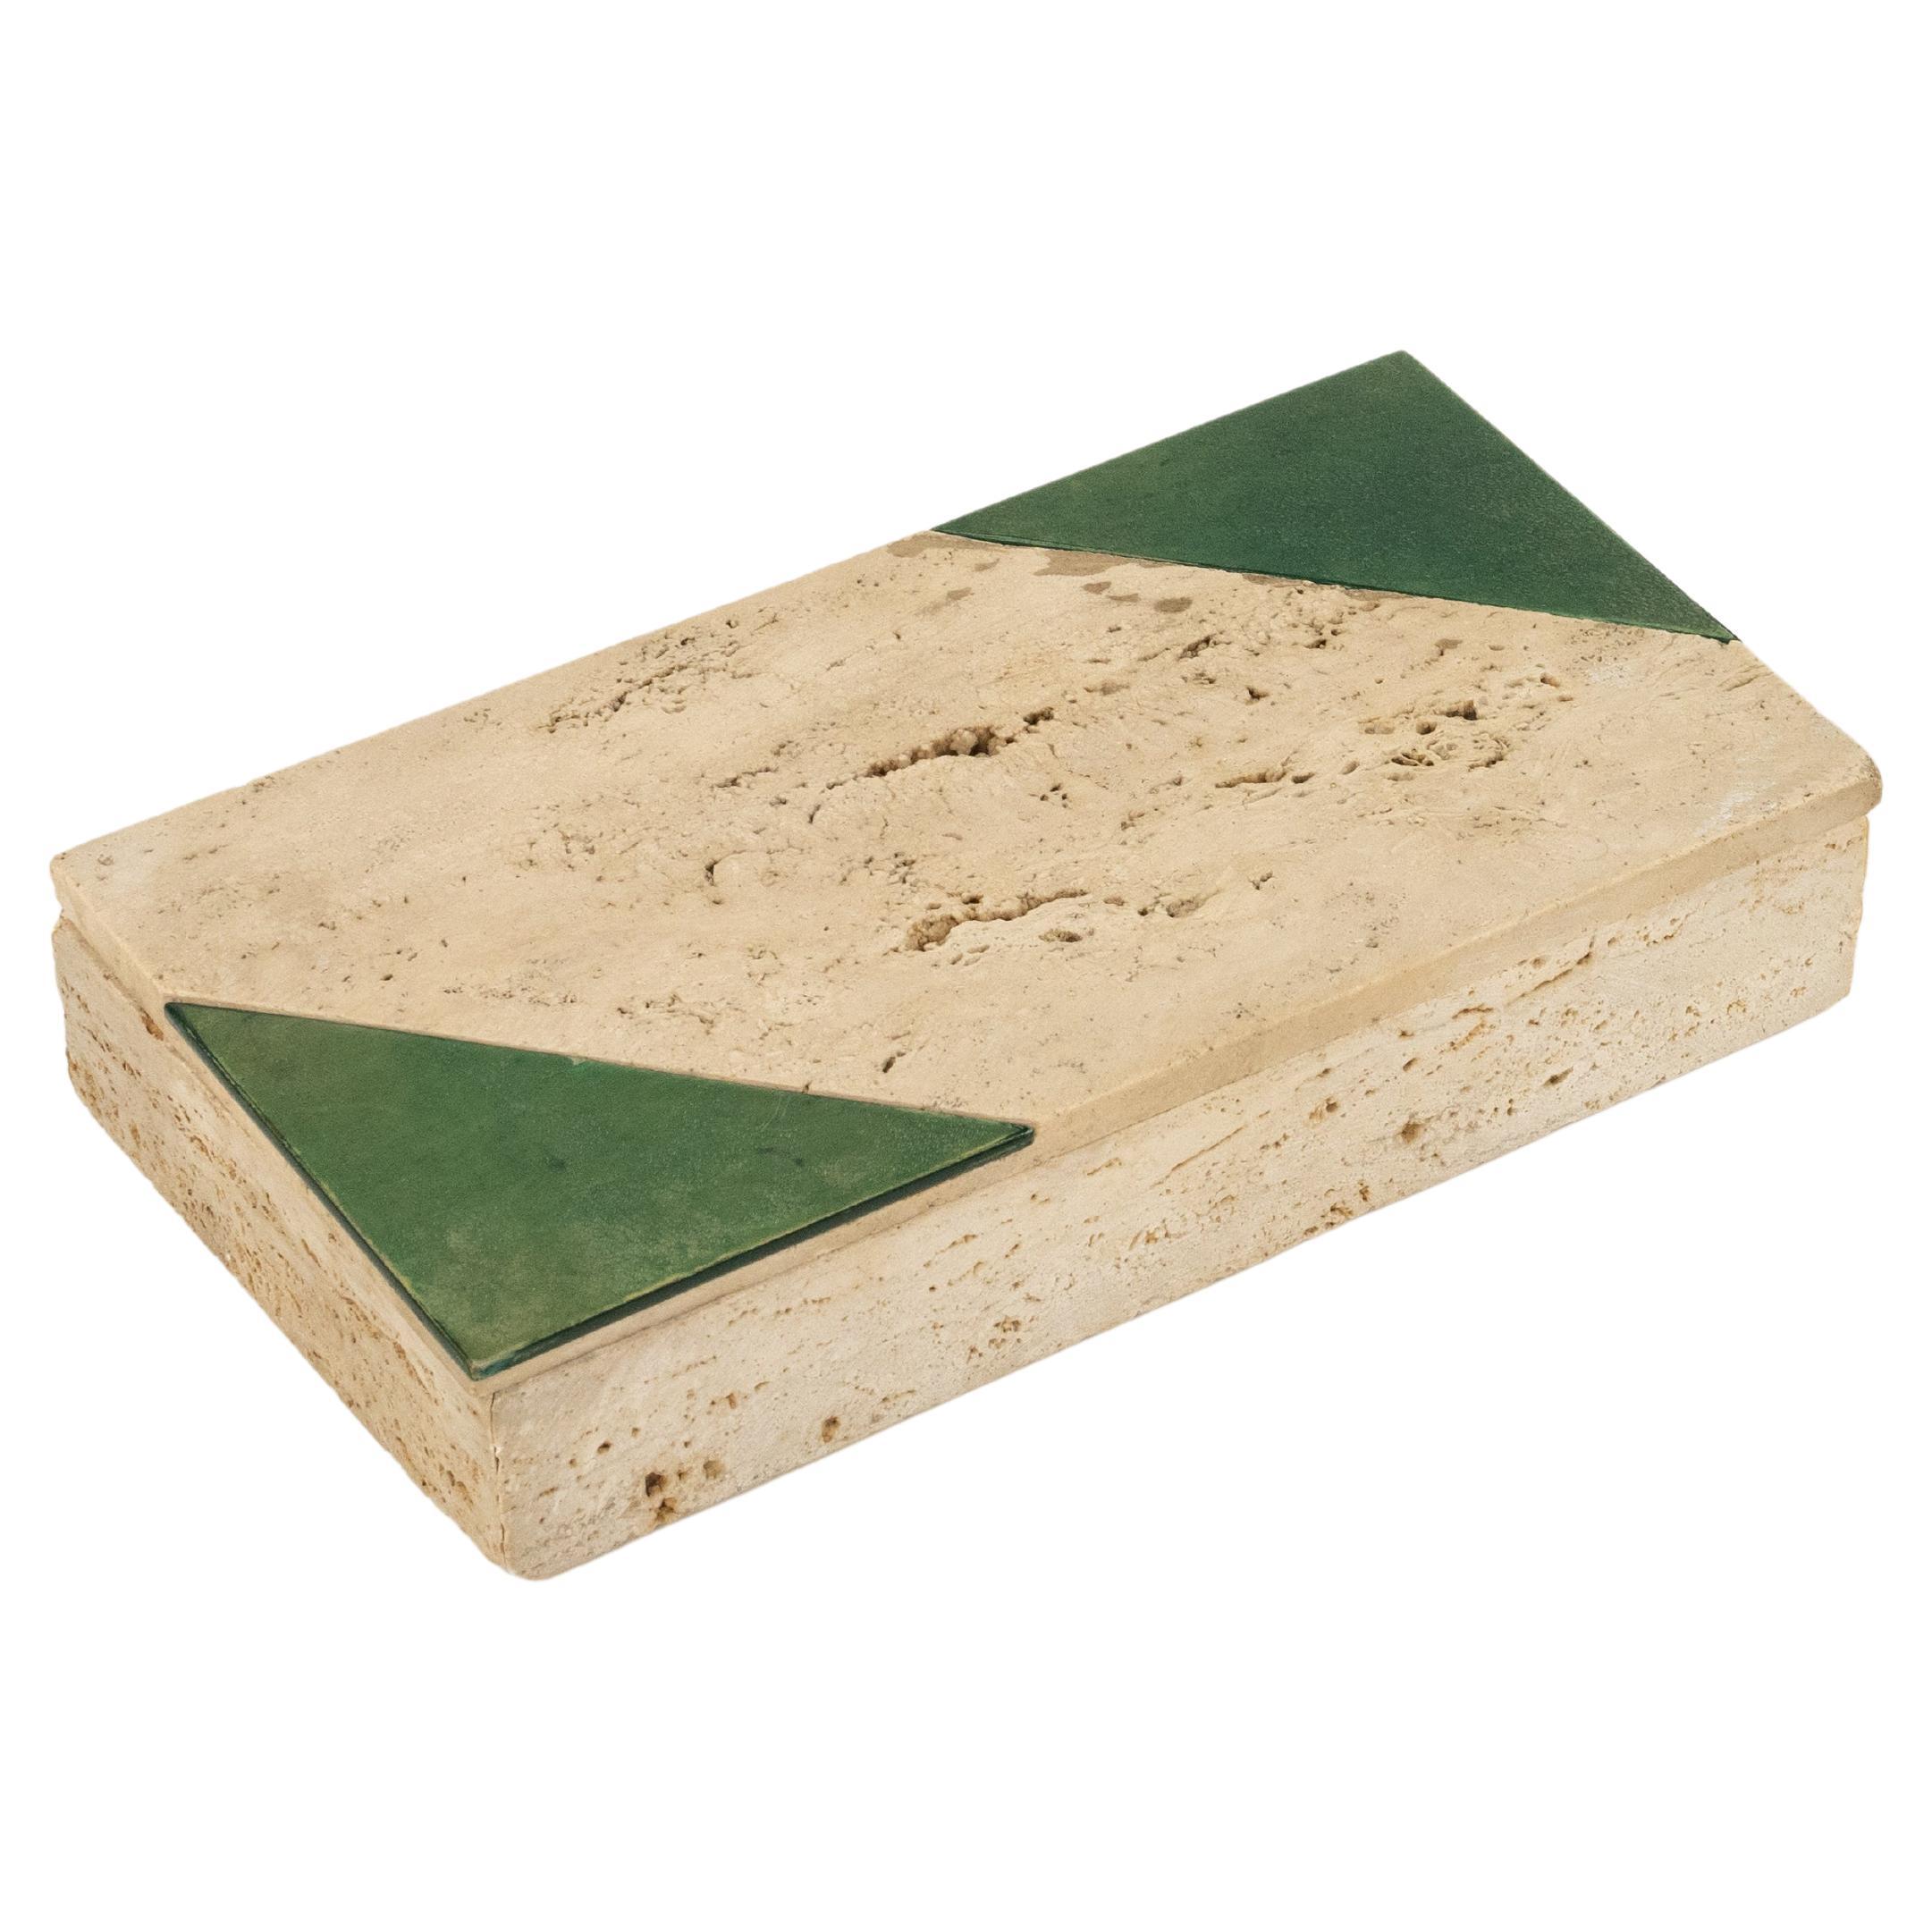 Rectangular Decorative Box in Travertine Fratelli Mannelli Style, Italy 1970s For Sale 13